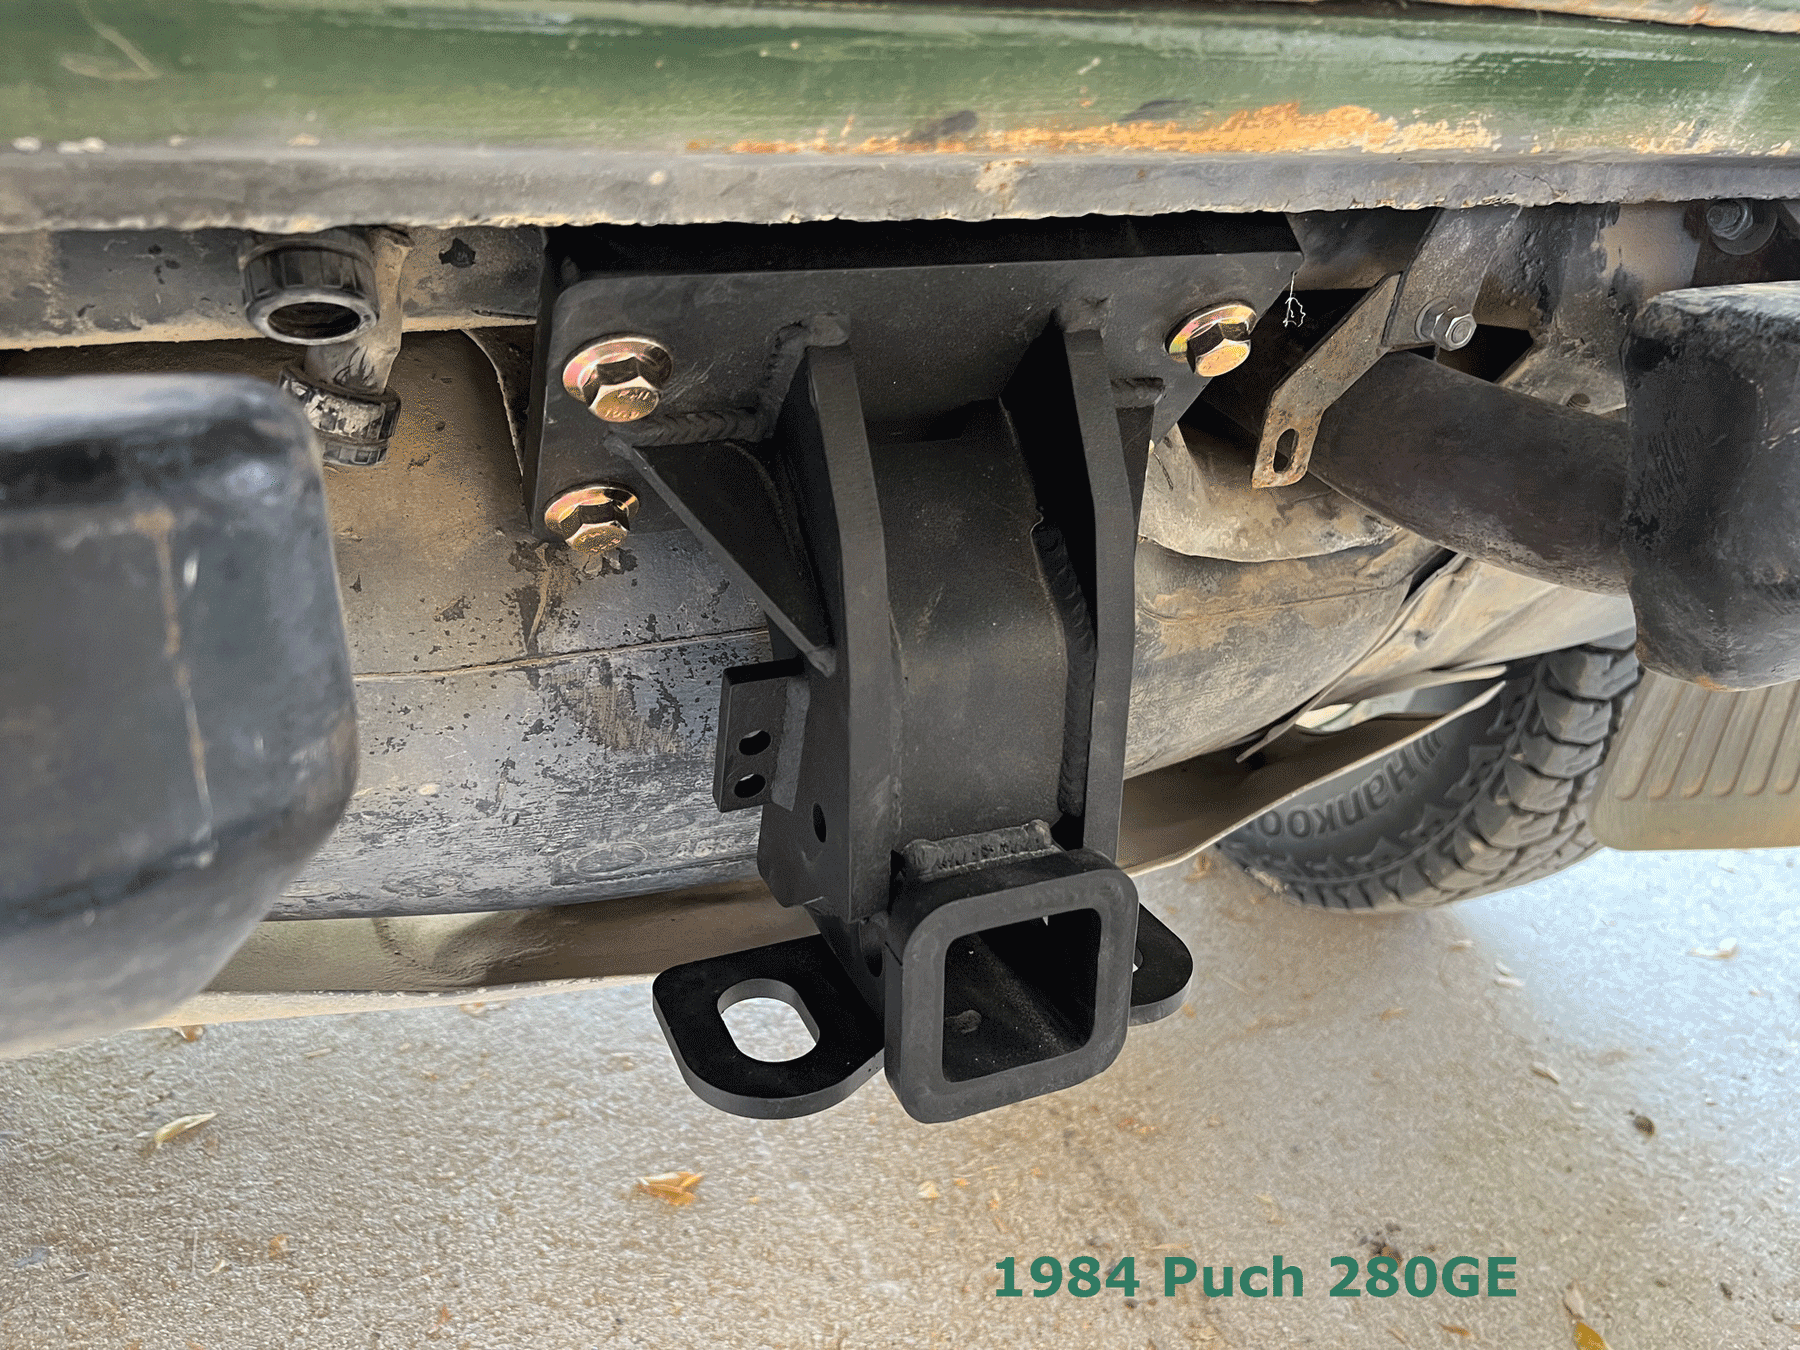 G-Wagen Heavy Duty Trailer Hitch for all G-Class model years from 1979 - 2018